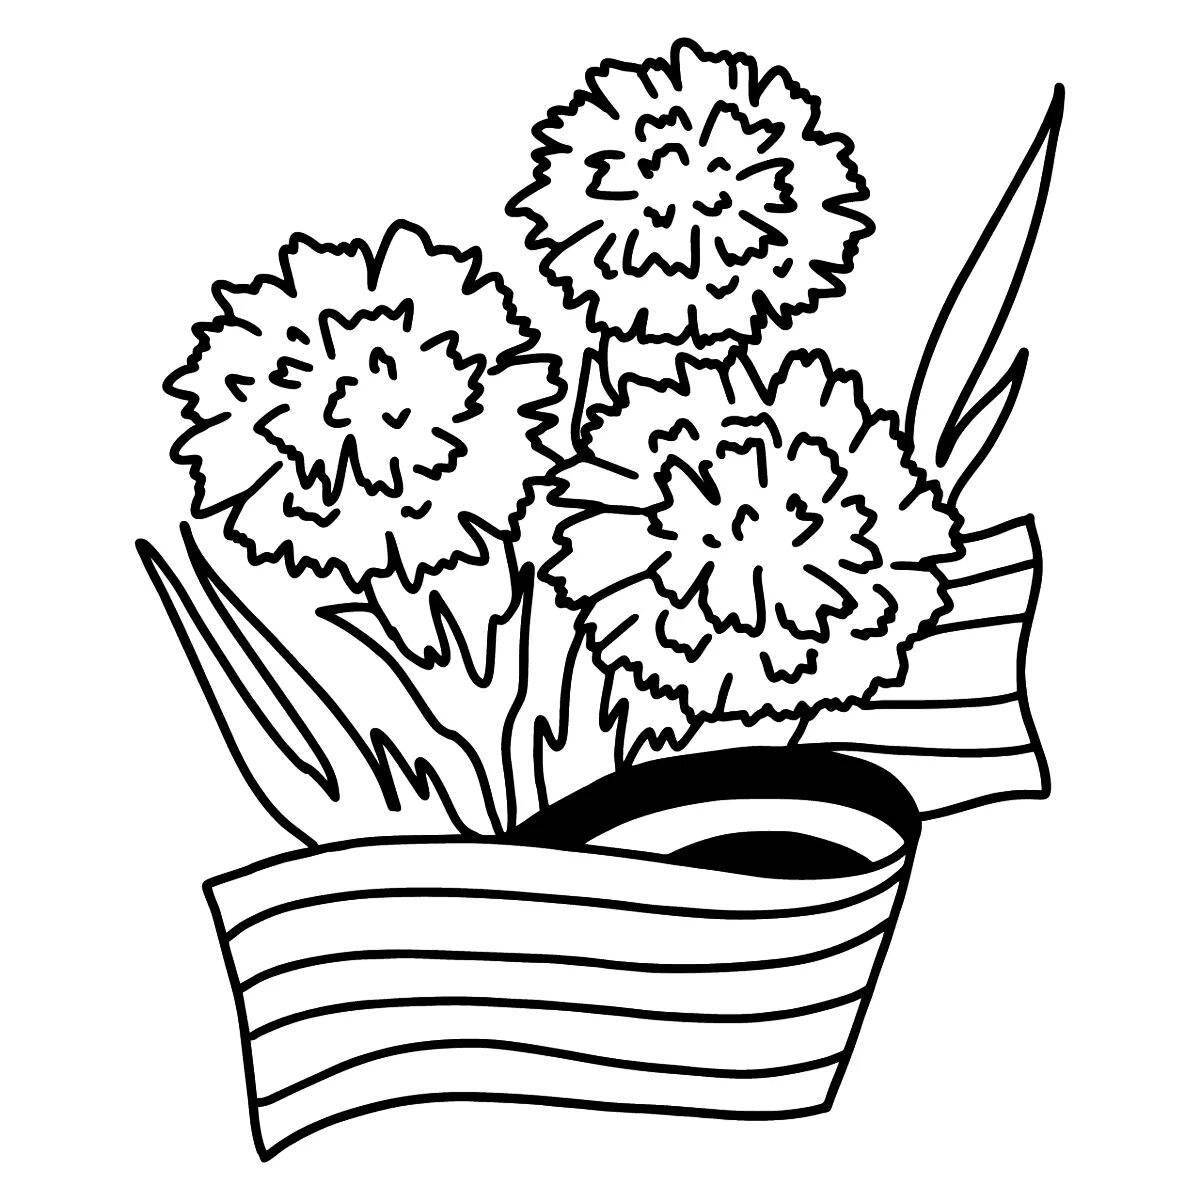 Charming carnation with St. George ribbon coloring page